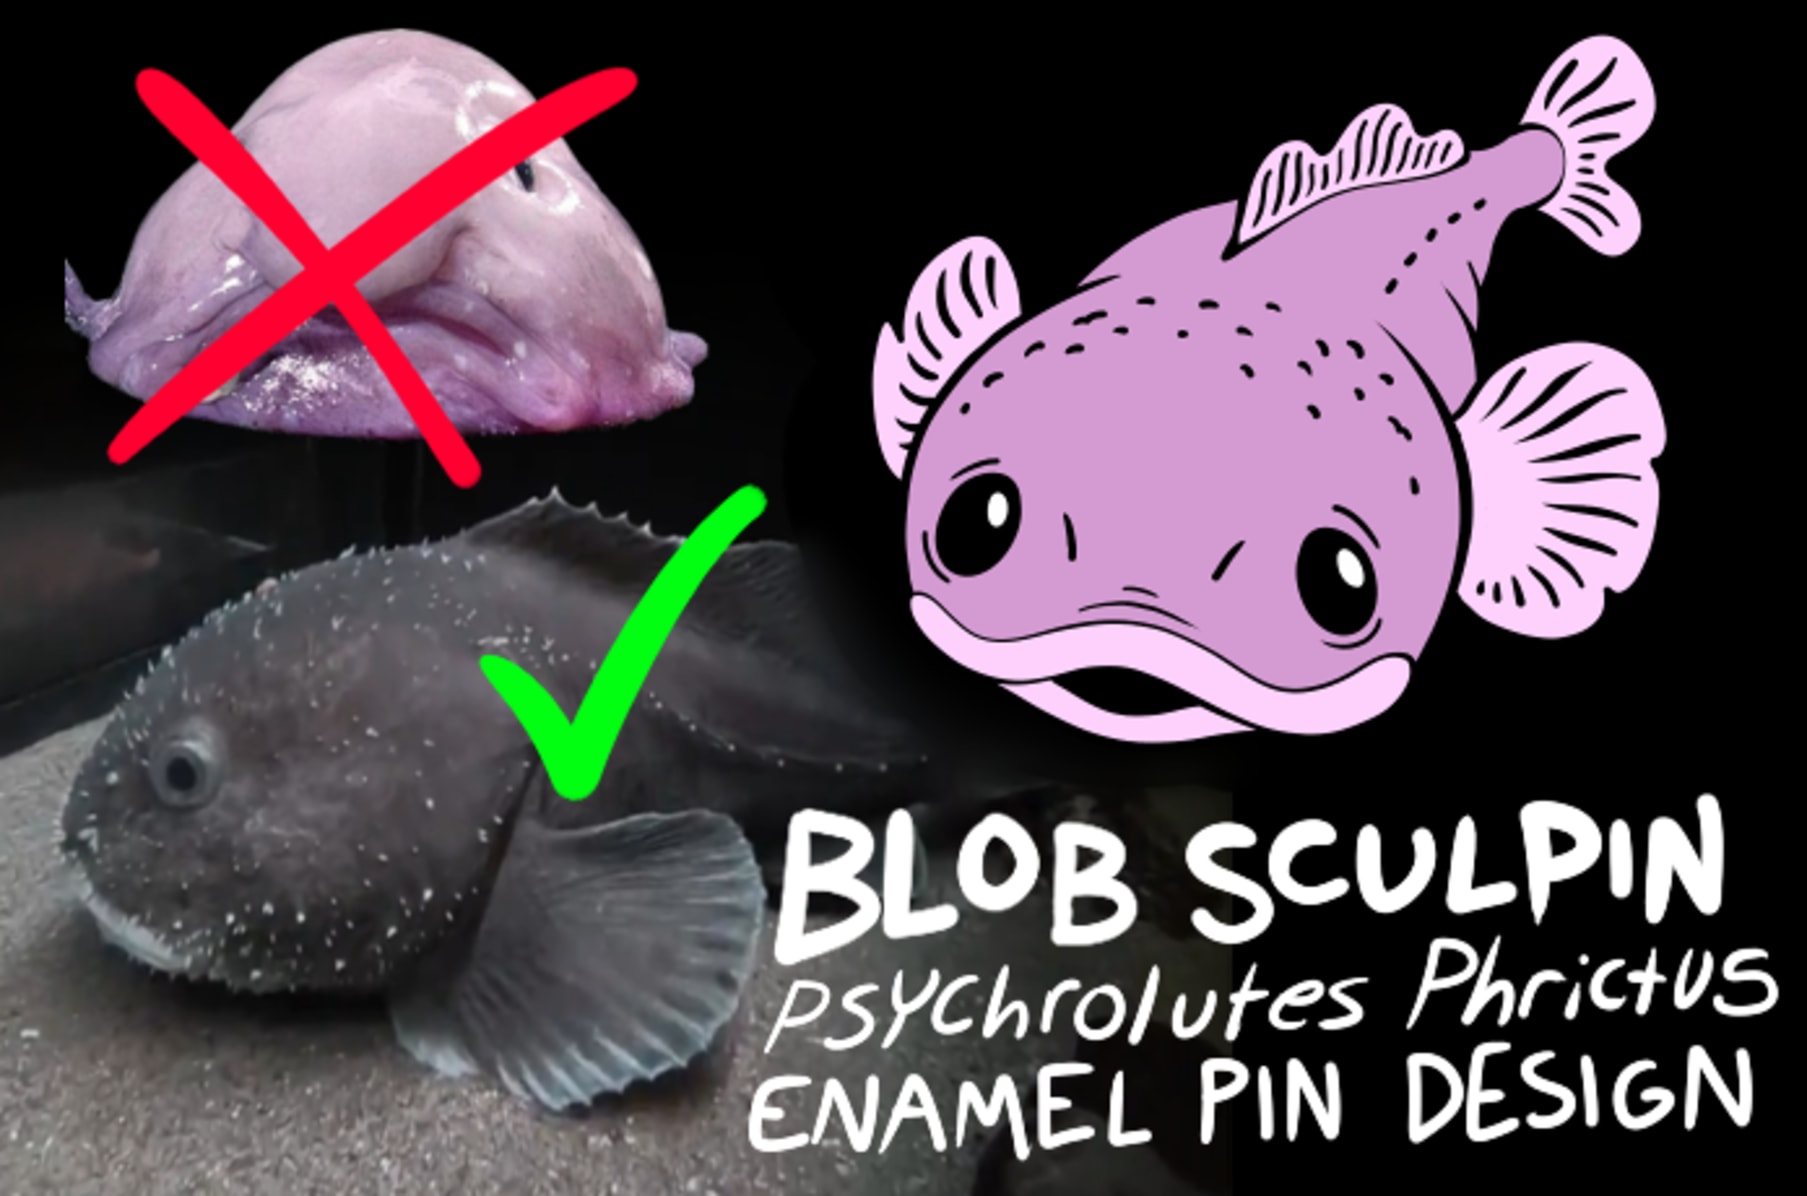 what blobfish really look like